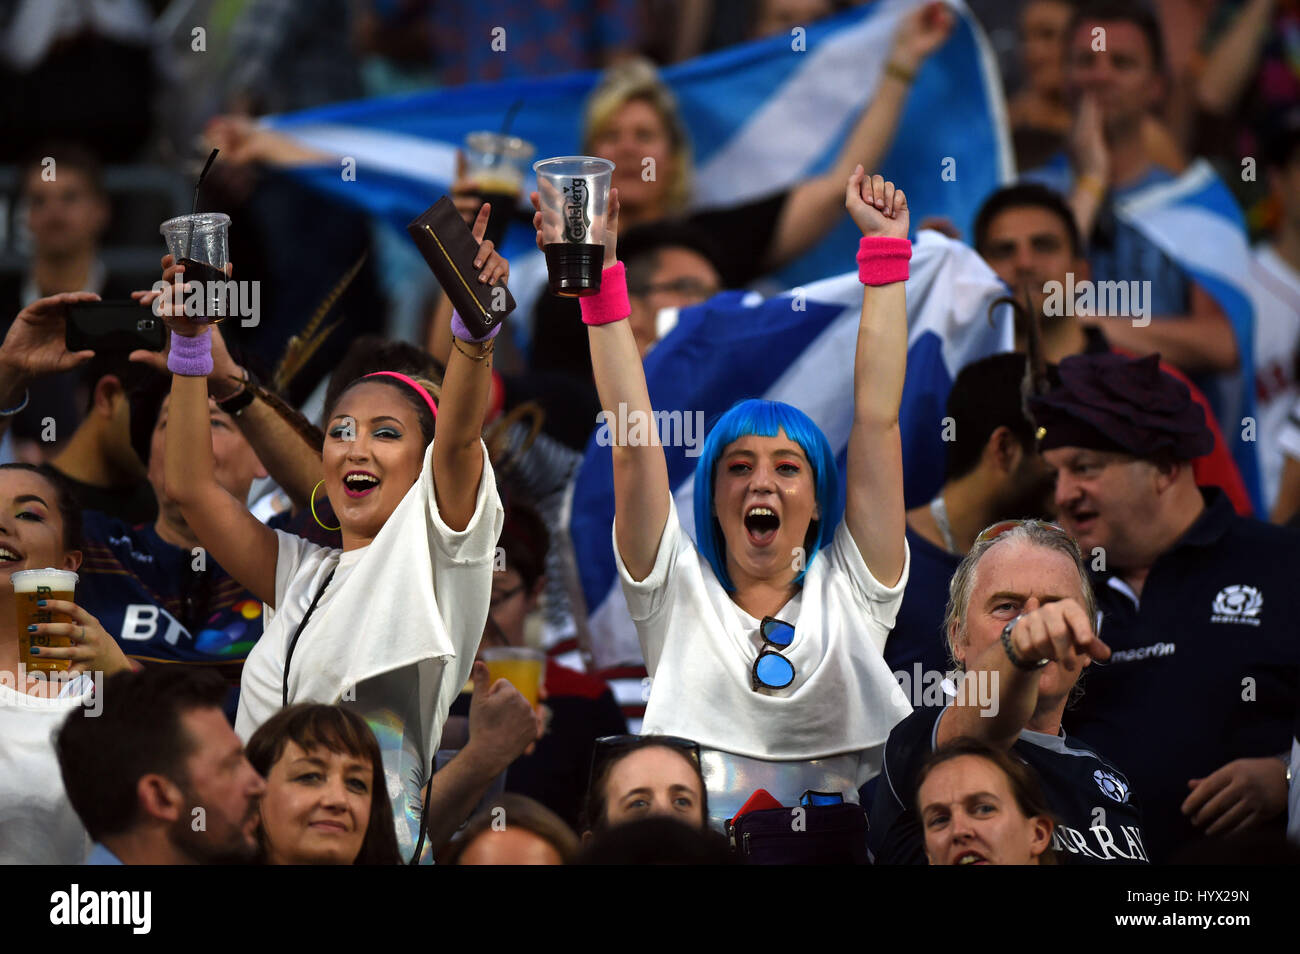 Hong Kong, China. 7th Apr, 2017. Supporters cheer for the team during the HSBC World Rugby Sevens Series 2016-2017 match in Hong Kong, south China, April 7, 2017. Credit: Lo Ping Fai/Xinhua/Alamy Live News Stock Photo